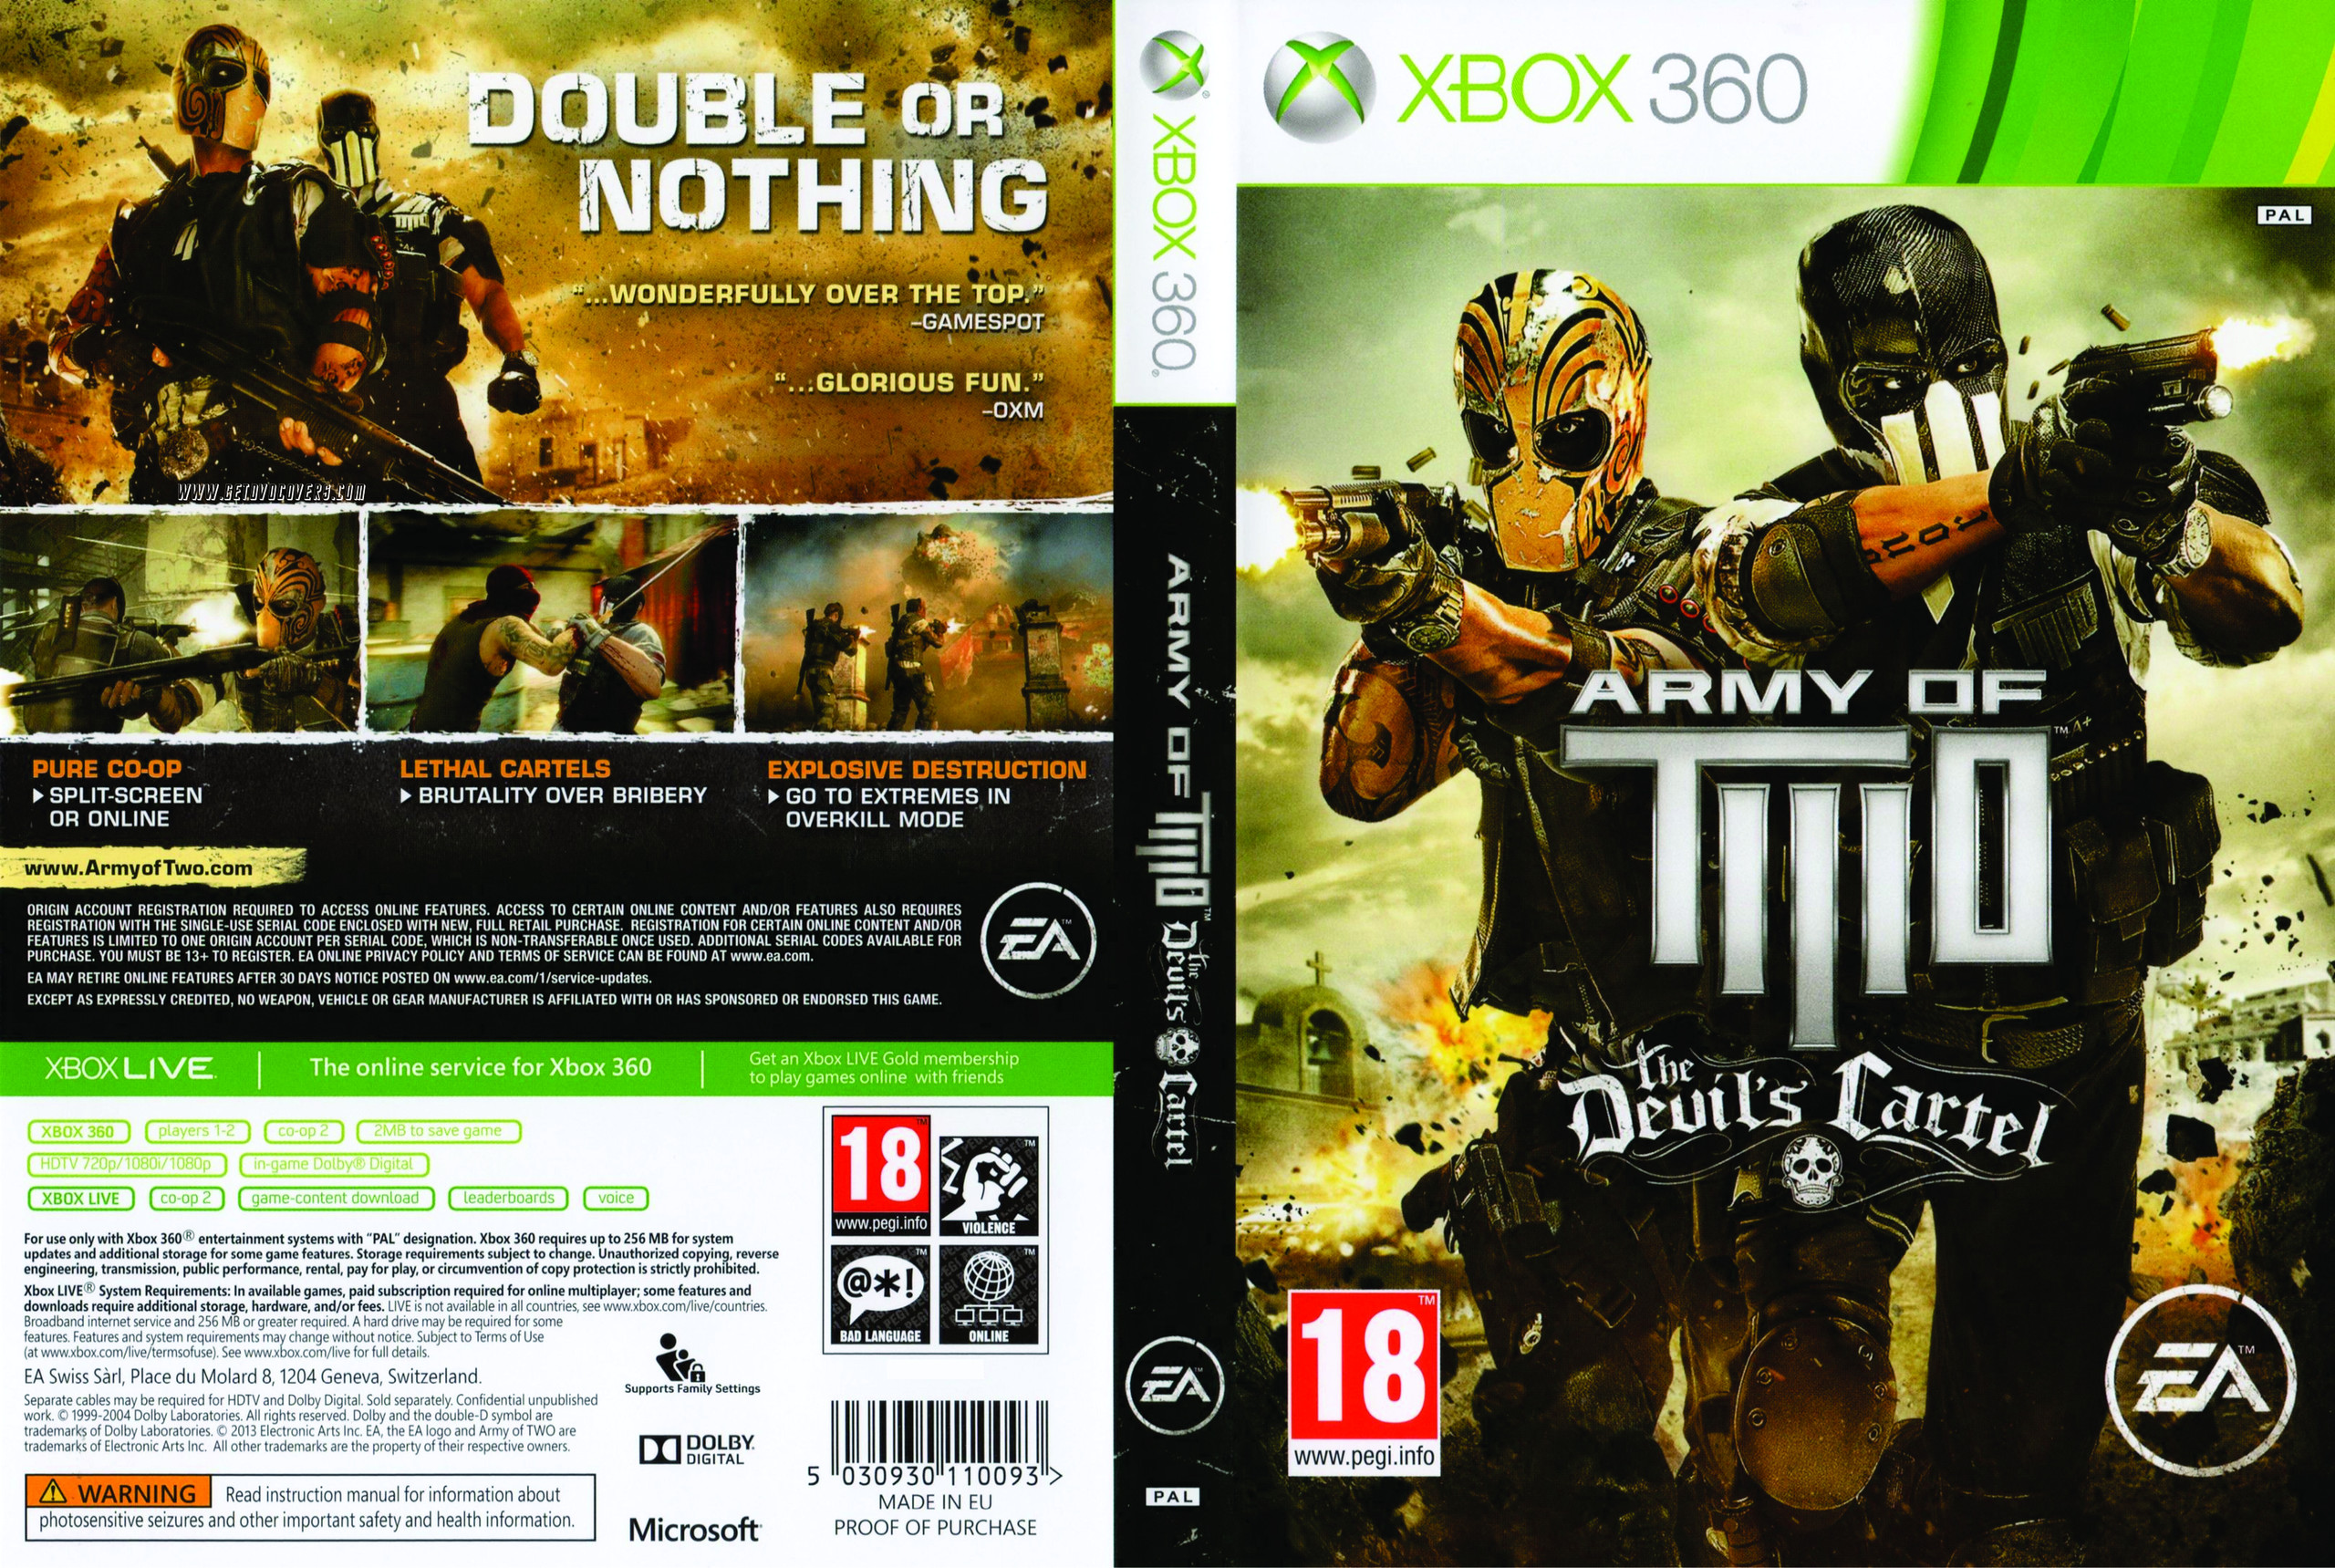 Xbox games download. Army of two Xbox 360 обложка. Army of two на Икс бокс 360. Обложки к играм Xbox 360 Army of two. Army of two the Devil's Cartel Xbox 360.